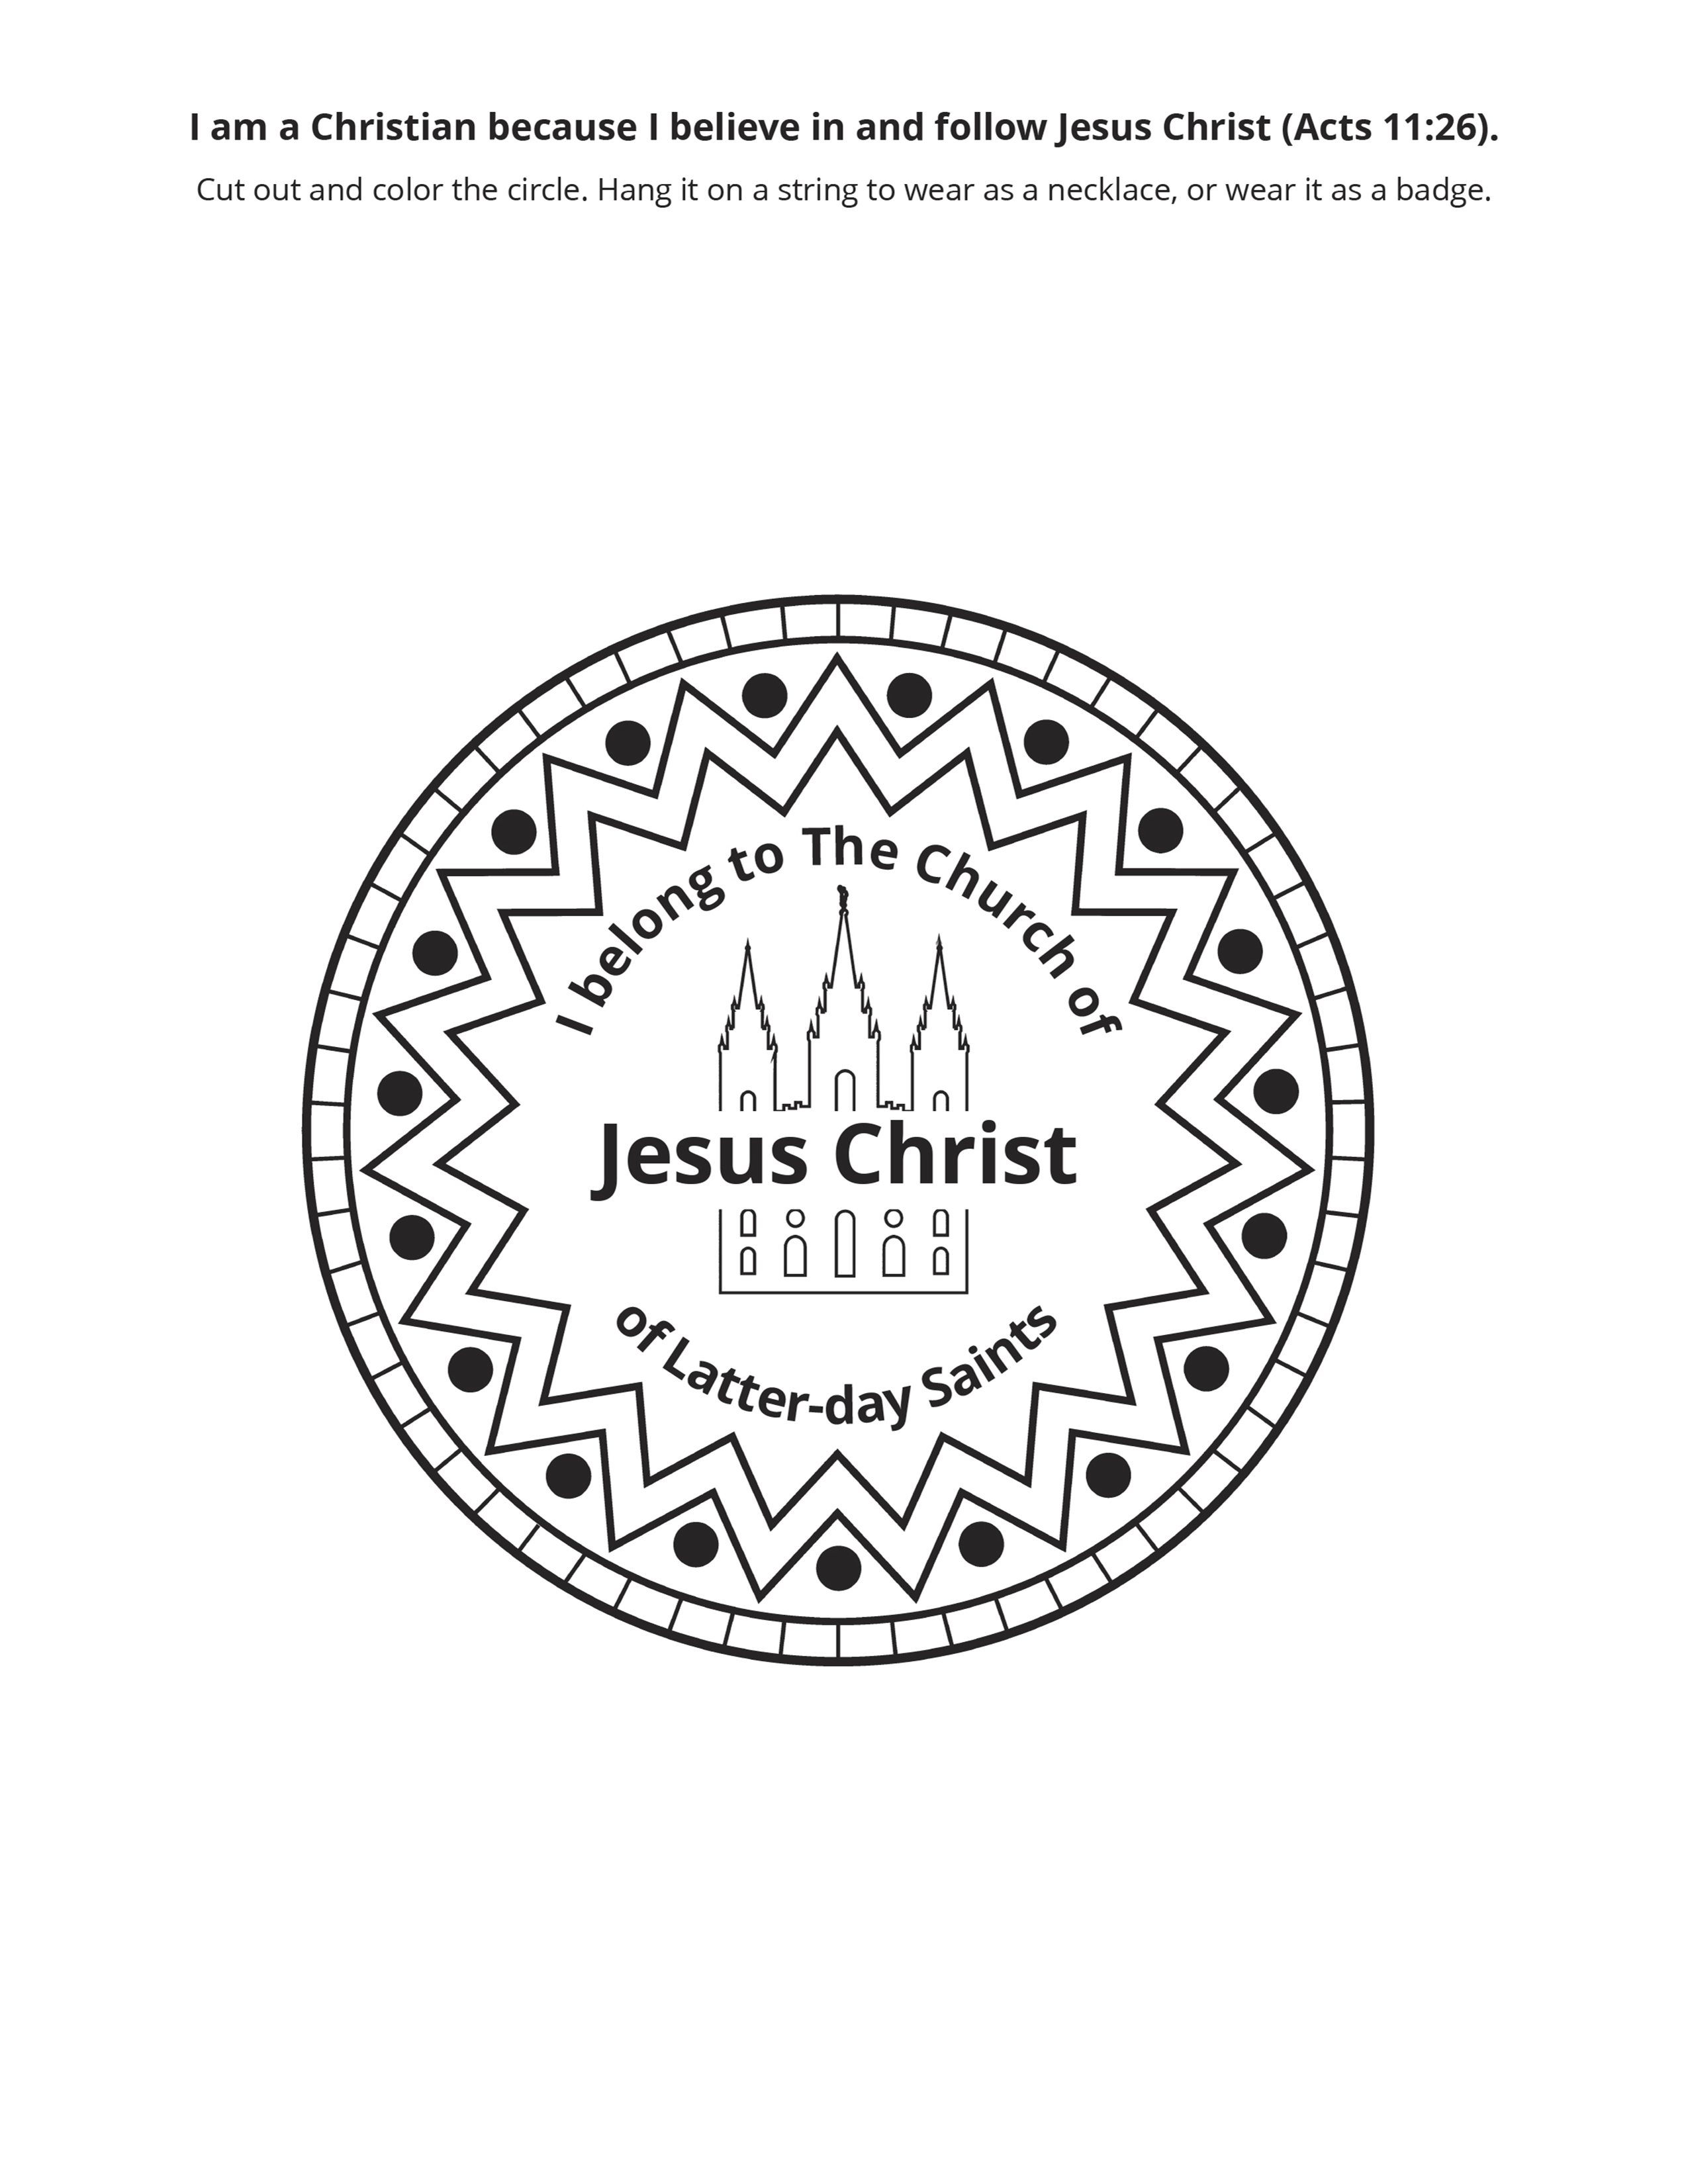 A printable badge that says “I belong to The Church of Jesus Christ of Latter-day Saints.”